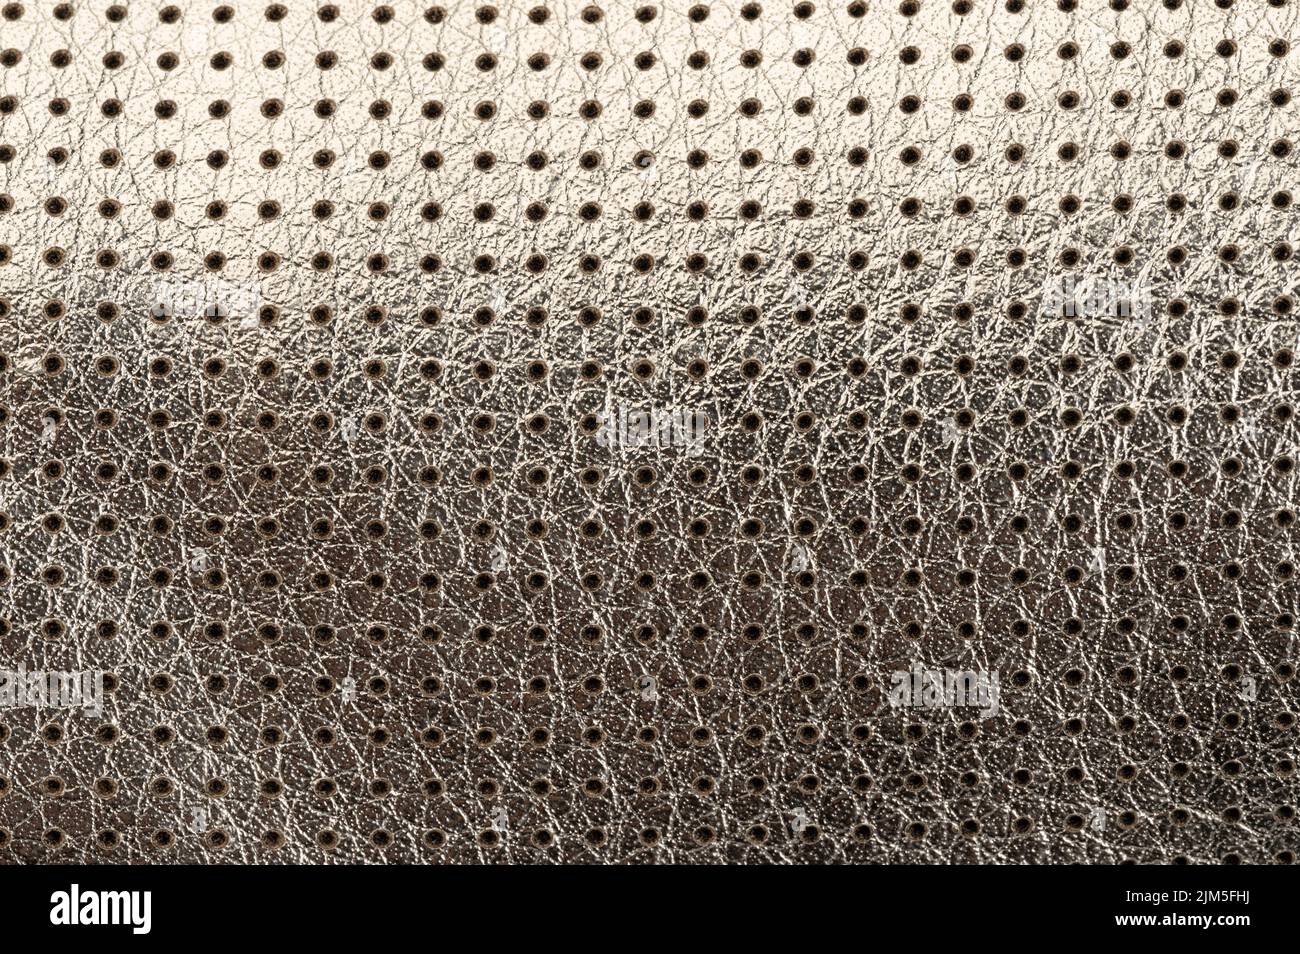 Shiny metal leather perforated background macro close up view Stock Photo